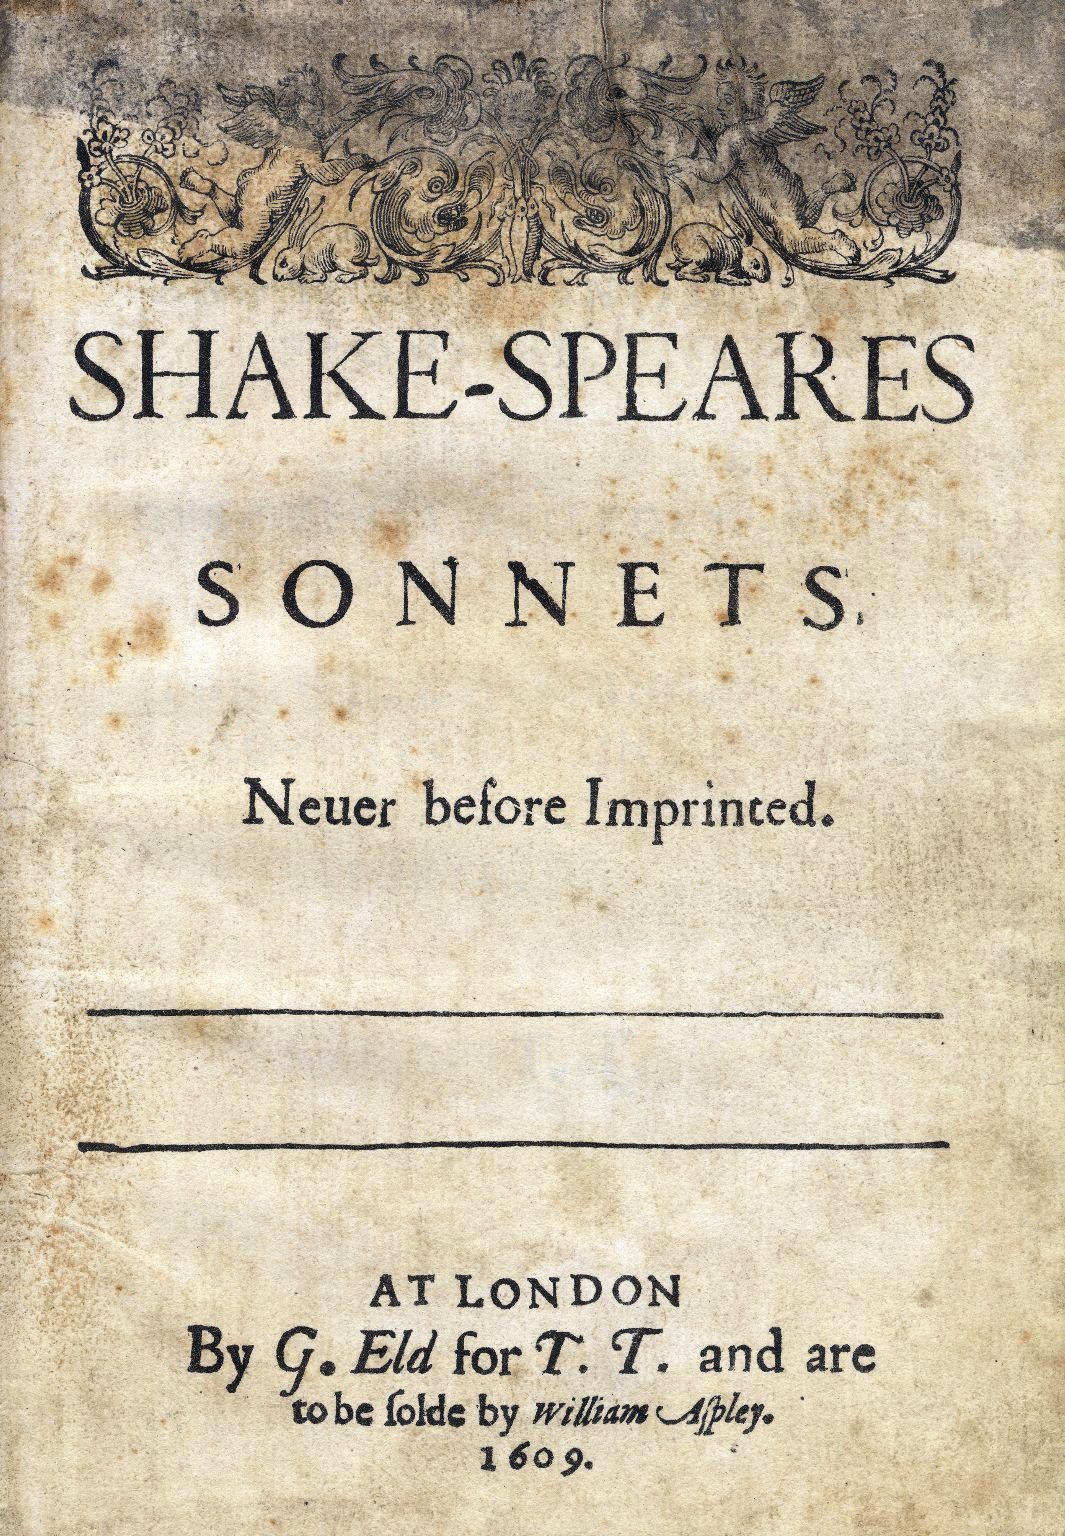 are all sonnets in iambic pentameter